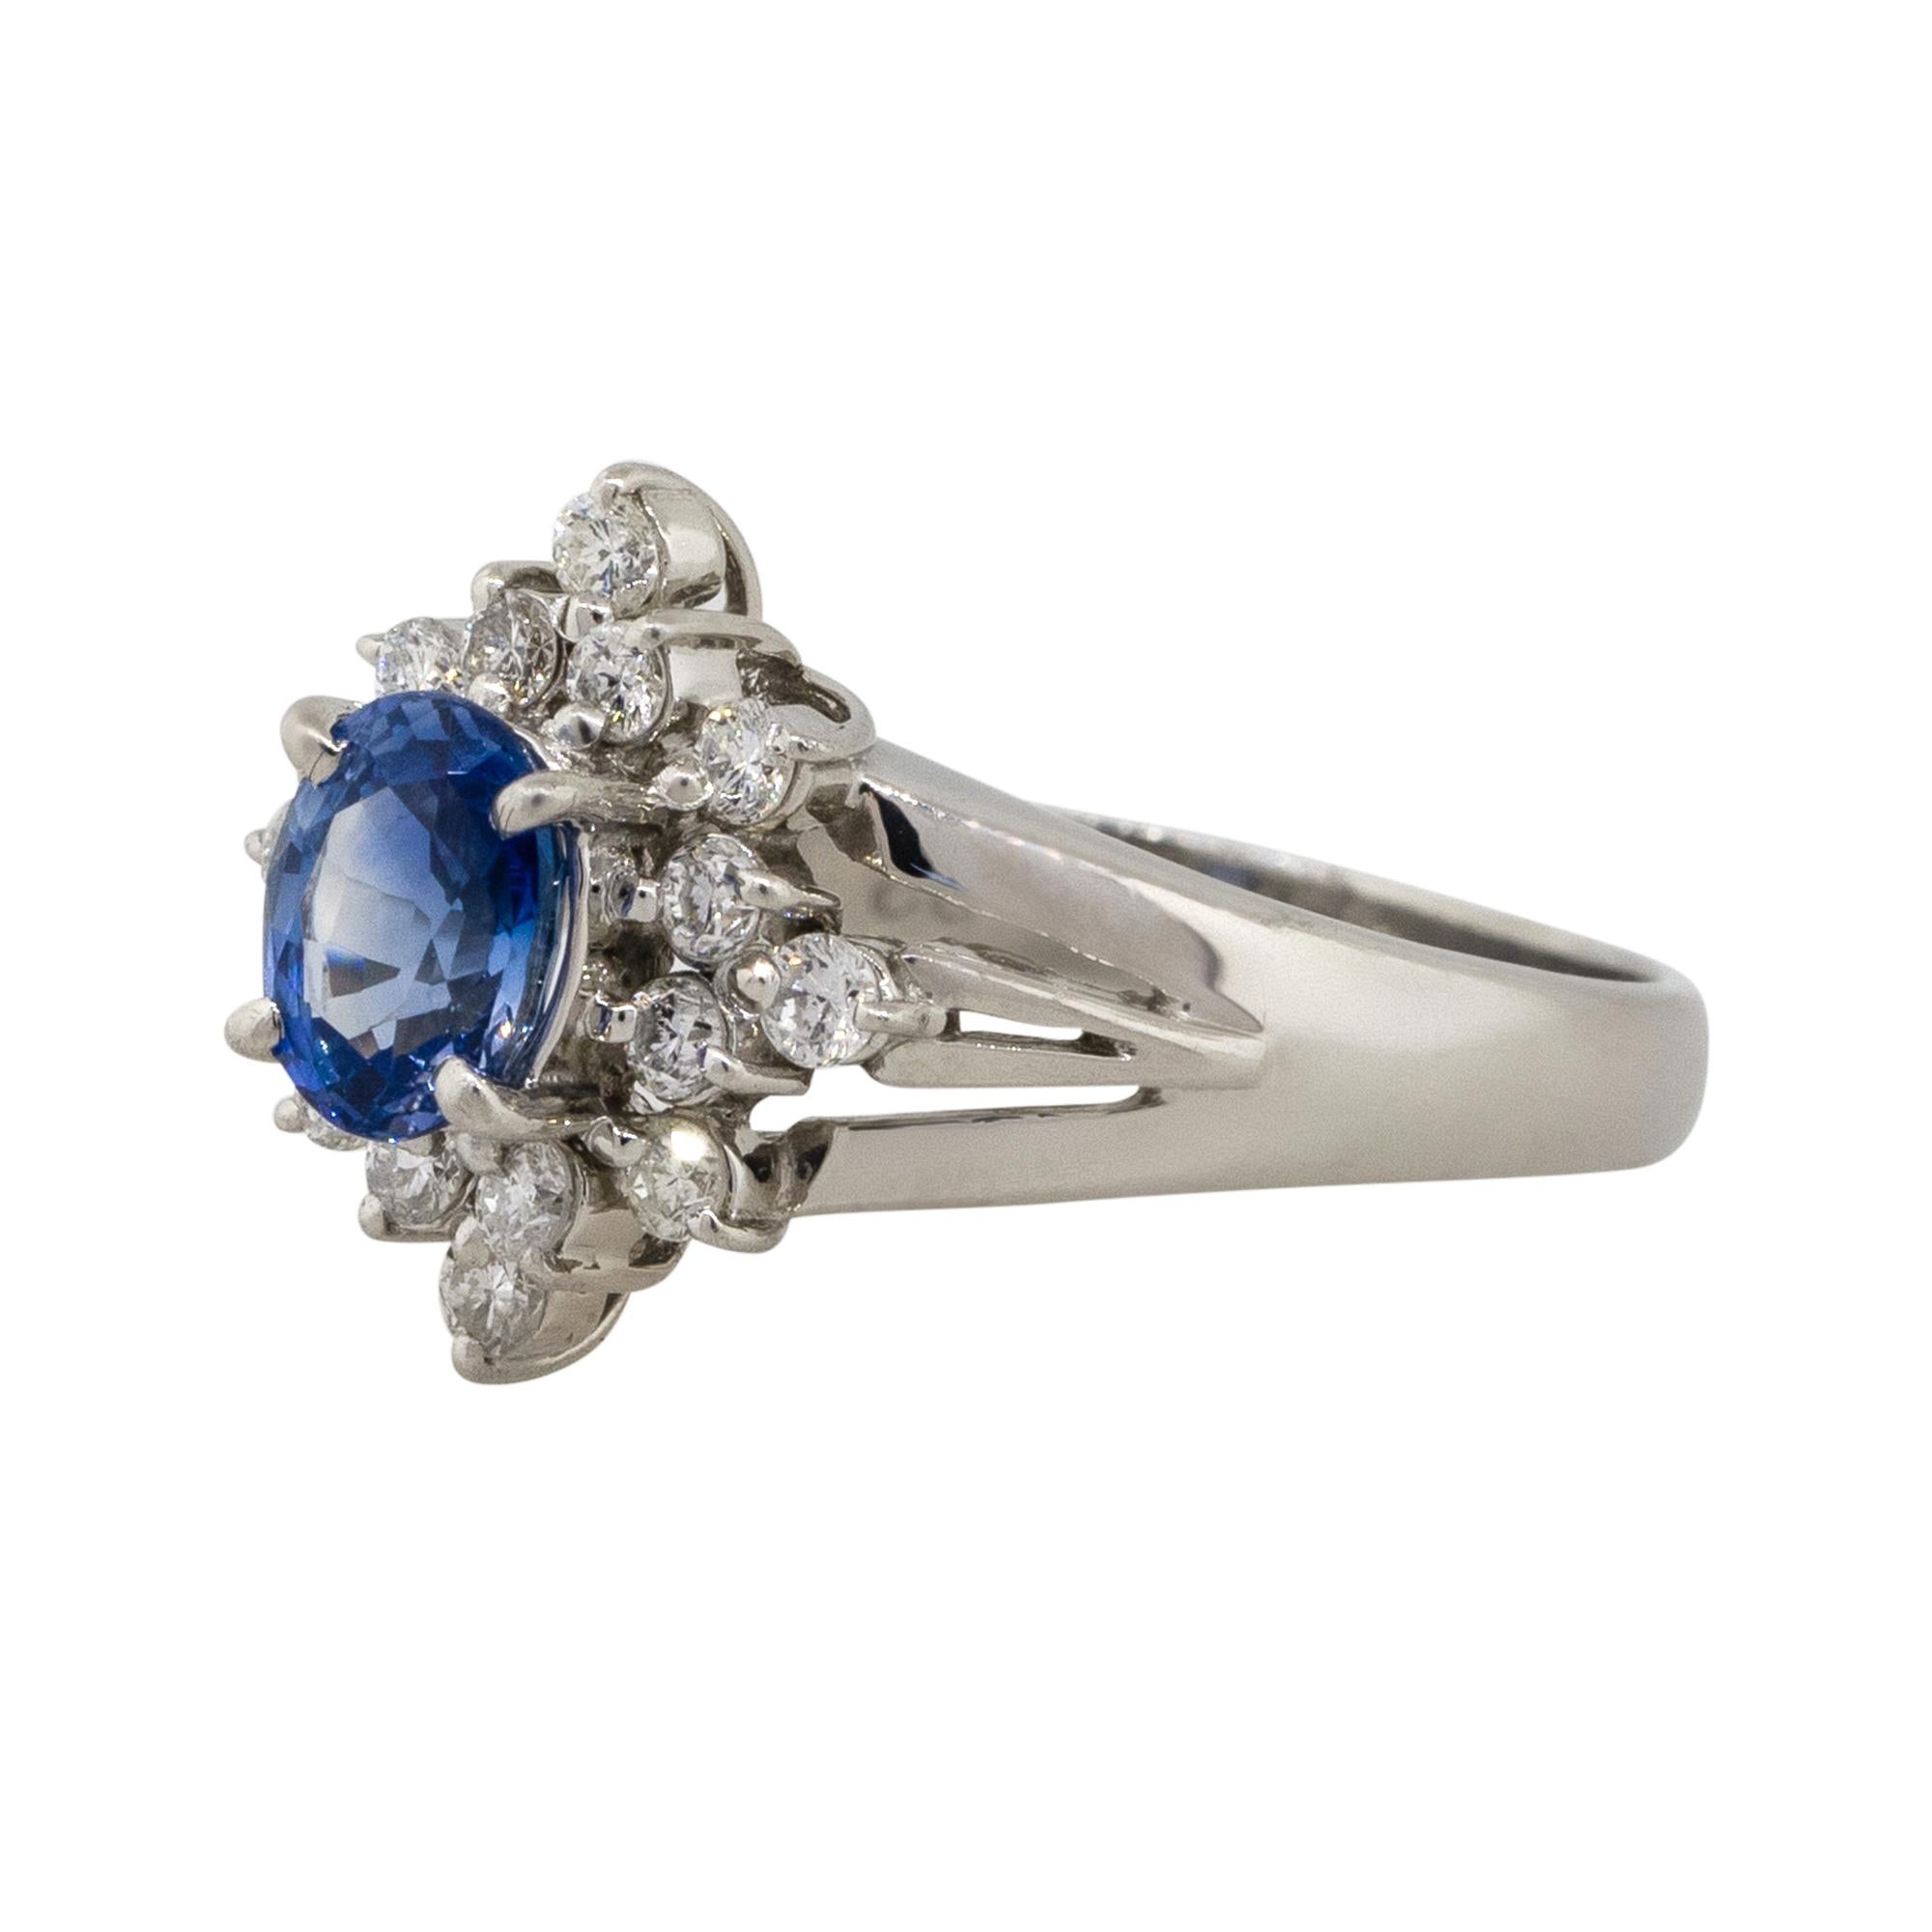 Material: Platinum
Gemstone details: Oval cut Sapphire center gemstone
Diamond details: Approx. 0.73ctw of round cut Diamonds. Diamonds are G/H in color and VS in clarity
Ring Size: 5 
Ring Measurements: 0.75